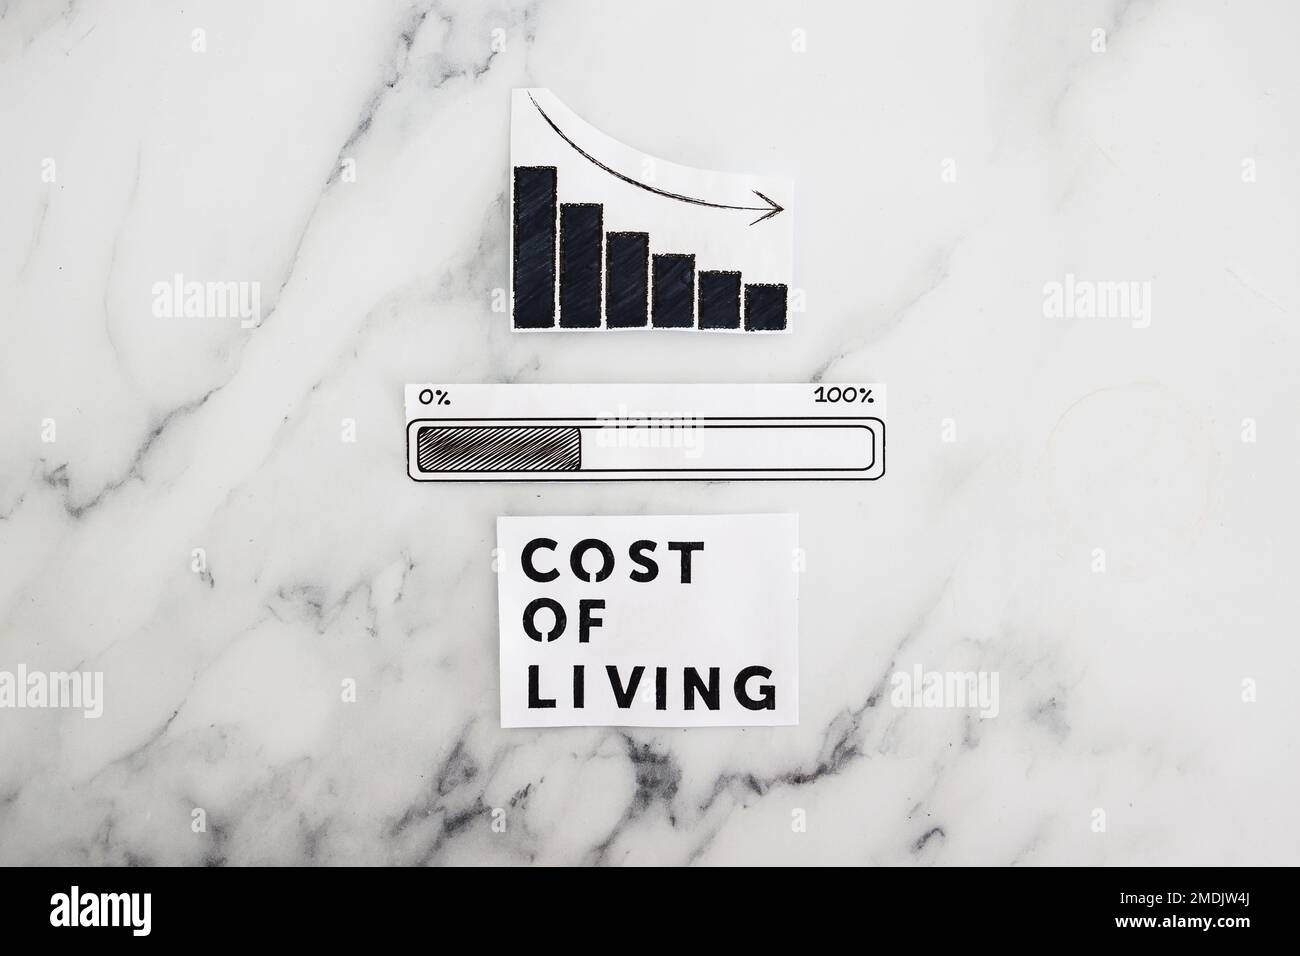 cost of living going down, text with graph showing stats decreasing and progress bar loading underneath Stock Photo